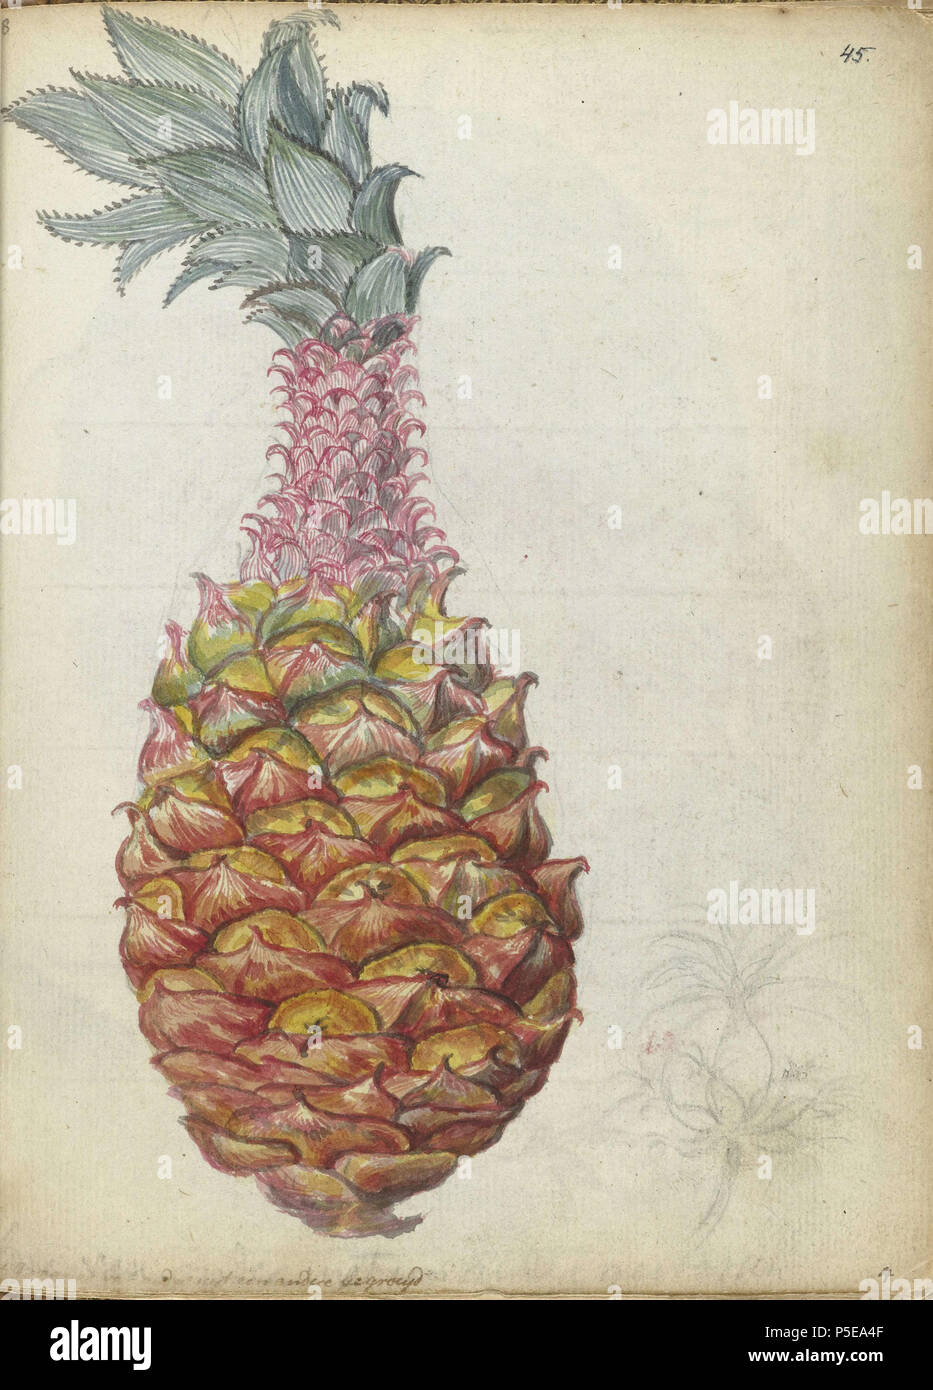 N/A. English: Drawing of a pineapple by Jan Brandes, 1785 . 1785. Jan Brandes, 1743-1808 97 Ananas, Jan Brandes, 1785 - Rijksmuseum Stock Photo